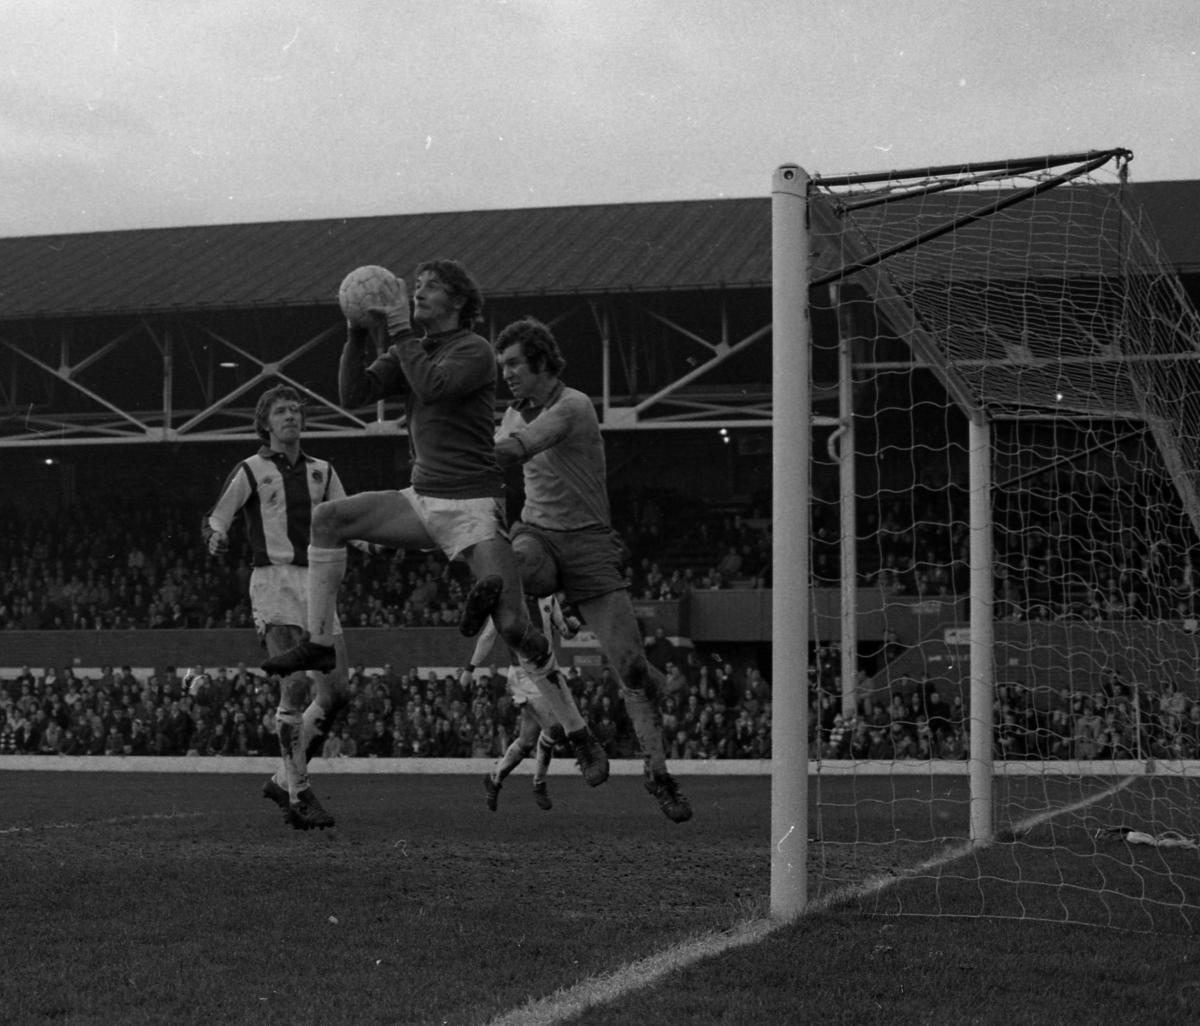 Saints v West Brom - Through the Years